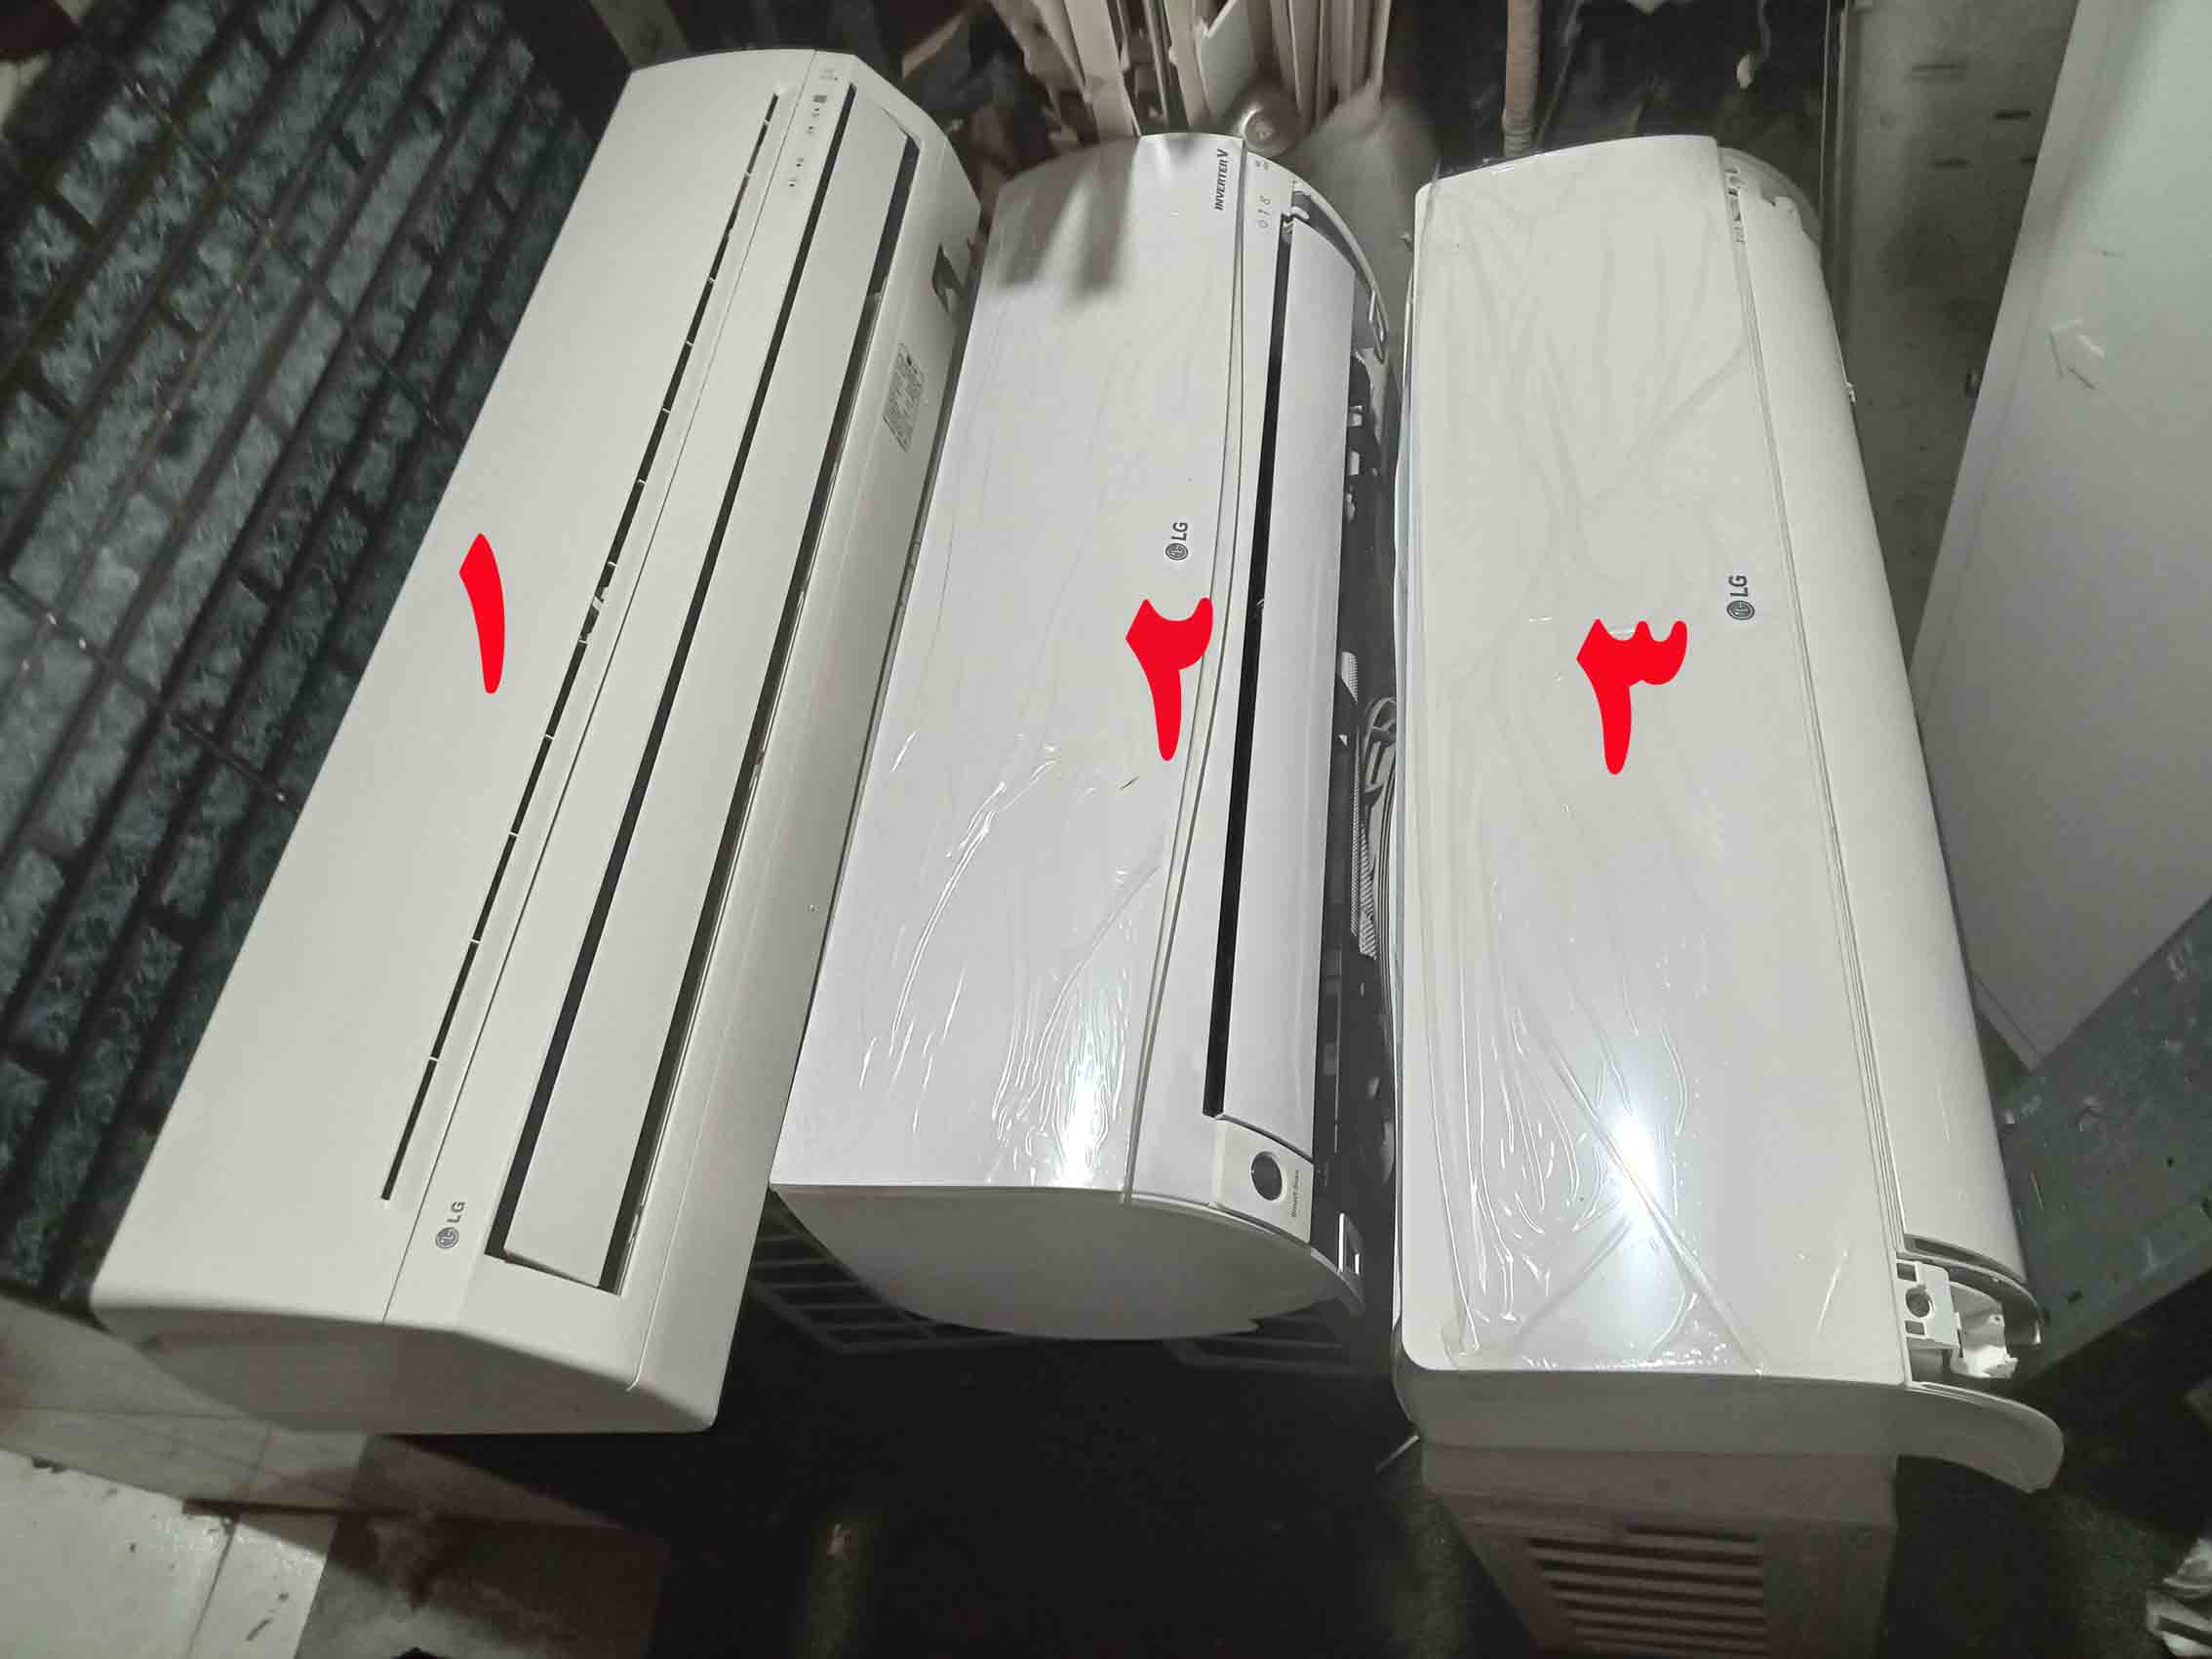 3 LG Airconditioner for sale